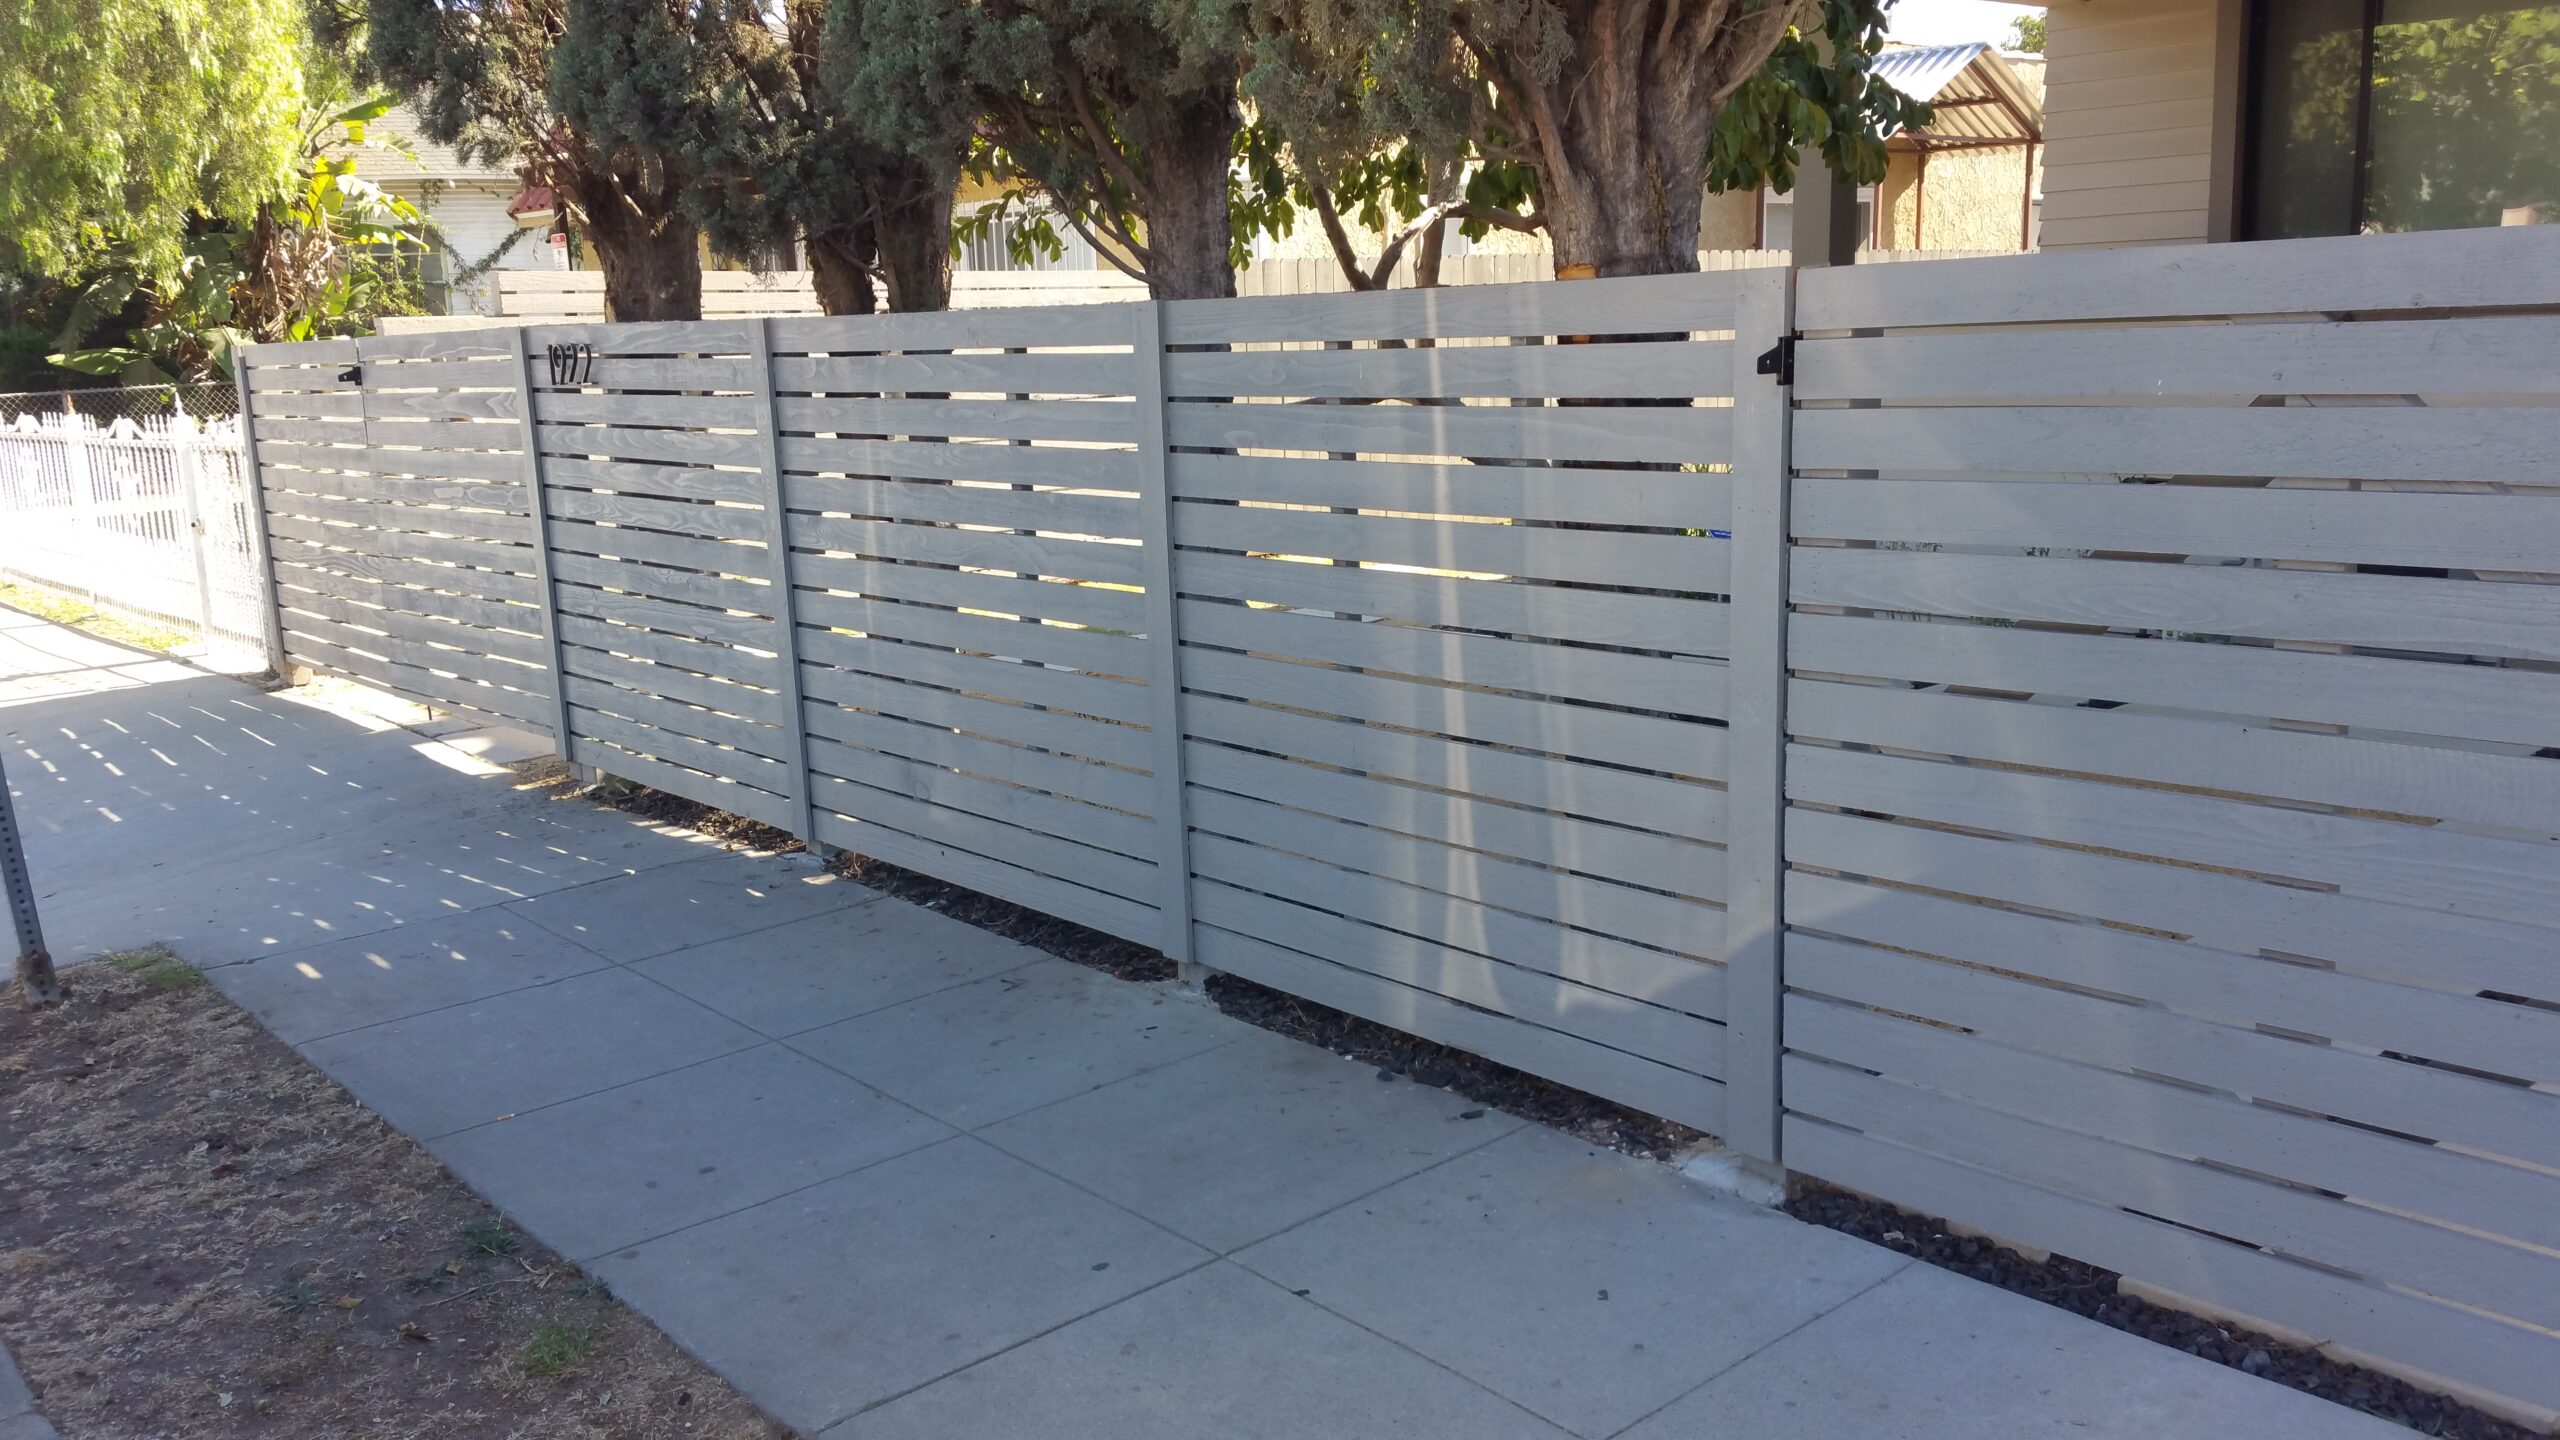 Custom, Modern Horizontal Wood Fence + Matching Pedestrian and Double-Swinger Driveway Gates in Los Angeles 90018, designed, built & painted by WoodFenceExpert.com